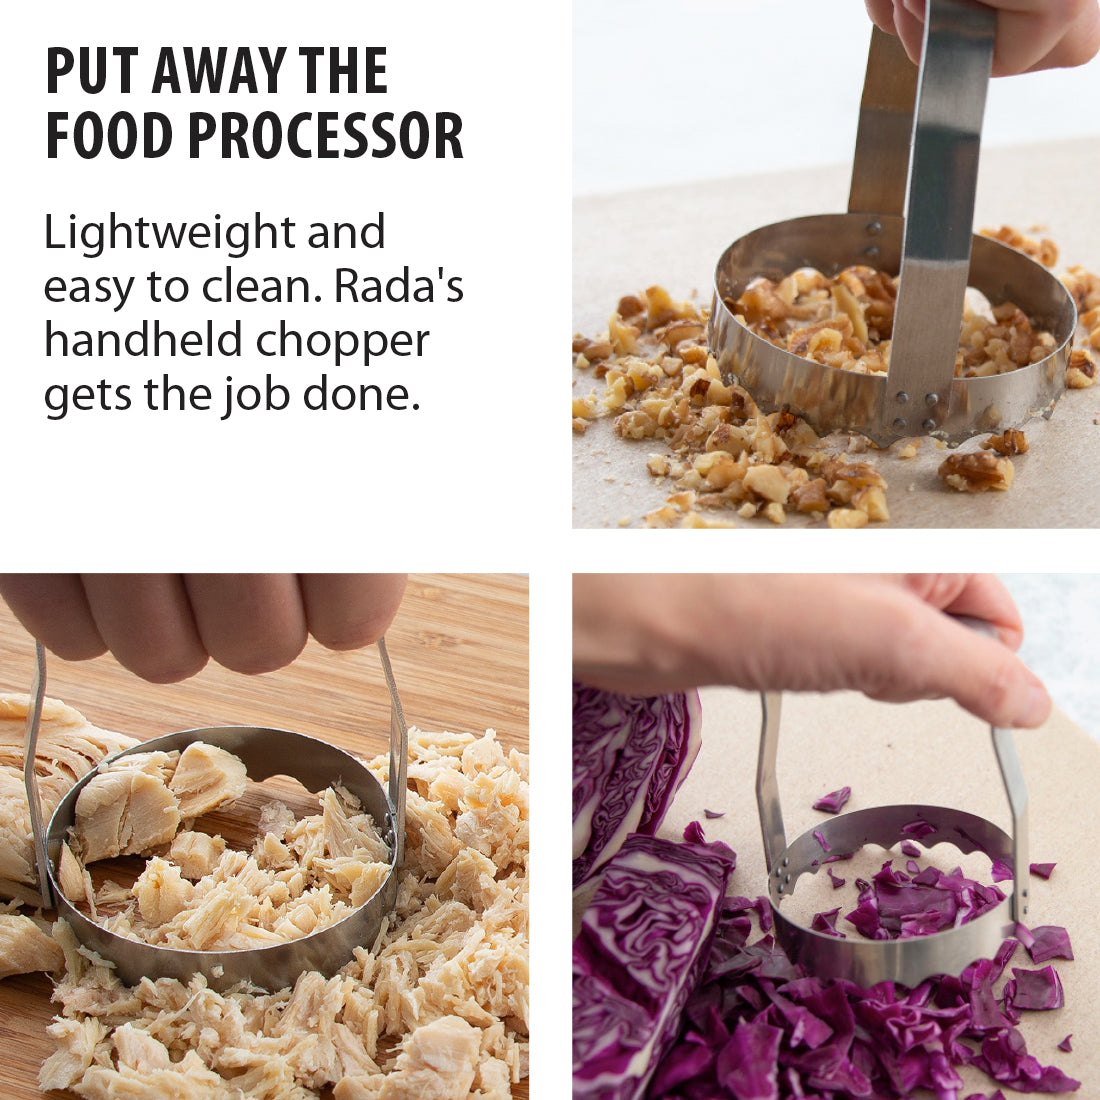 Pampered Chef - The Food Chopper makes quick work of chopping veggies,  cooked meat and nuts in seconds:  How long does it  take you to prep dinner?